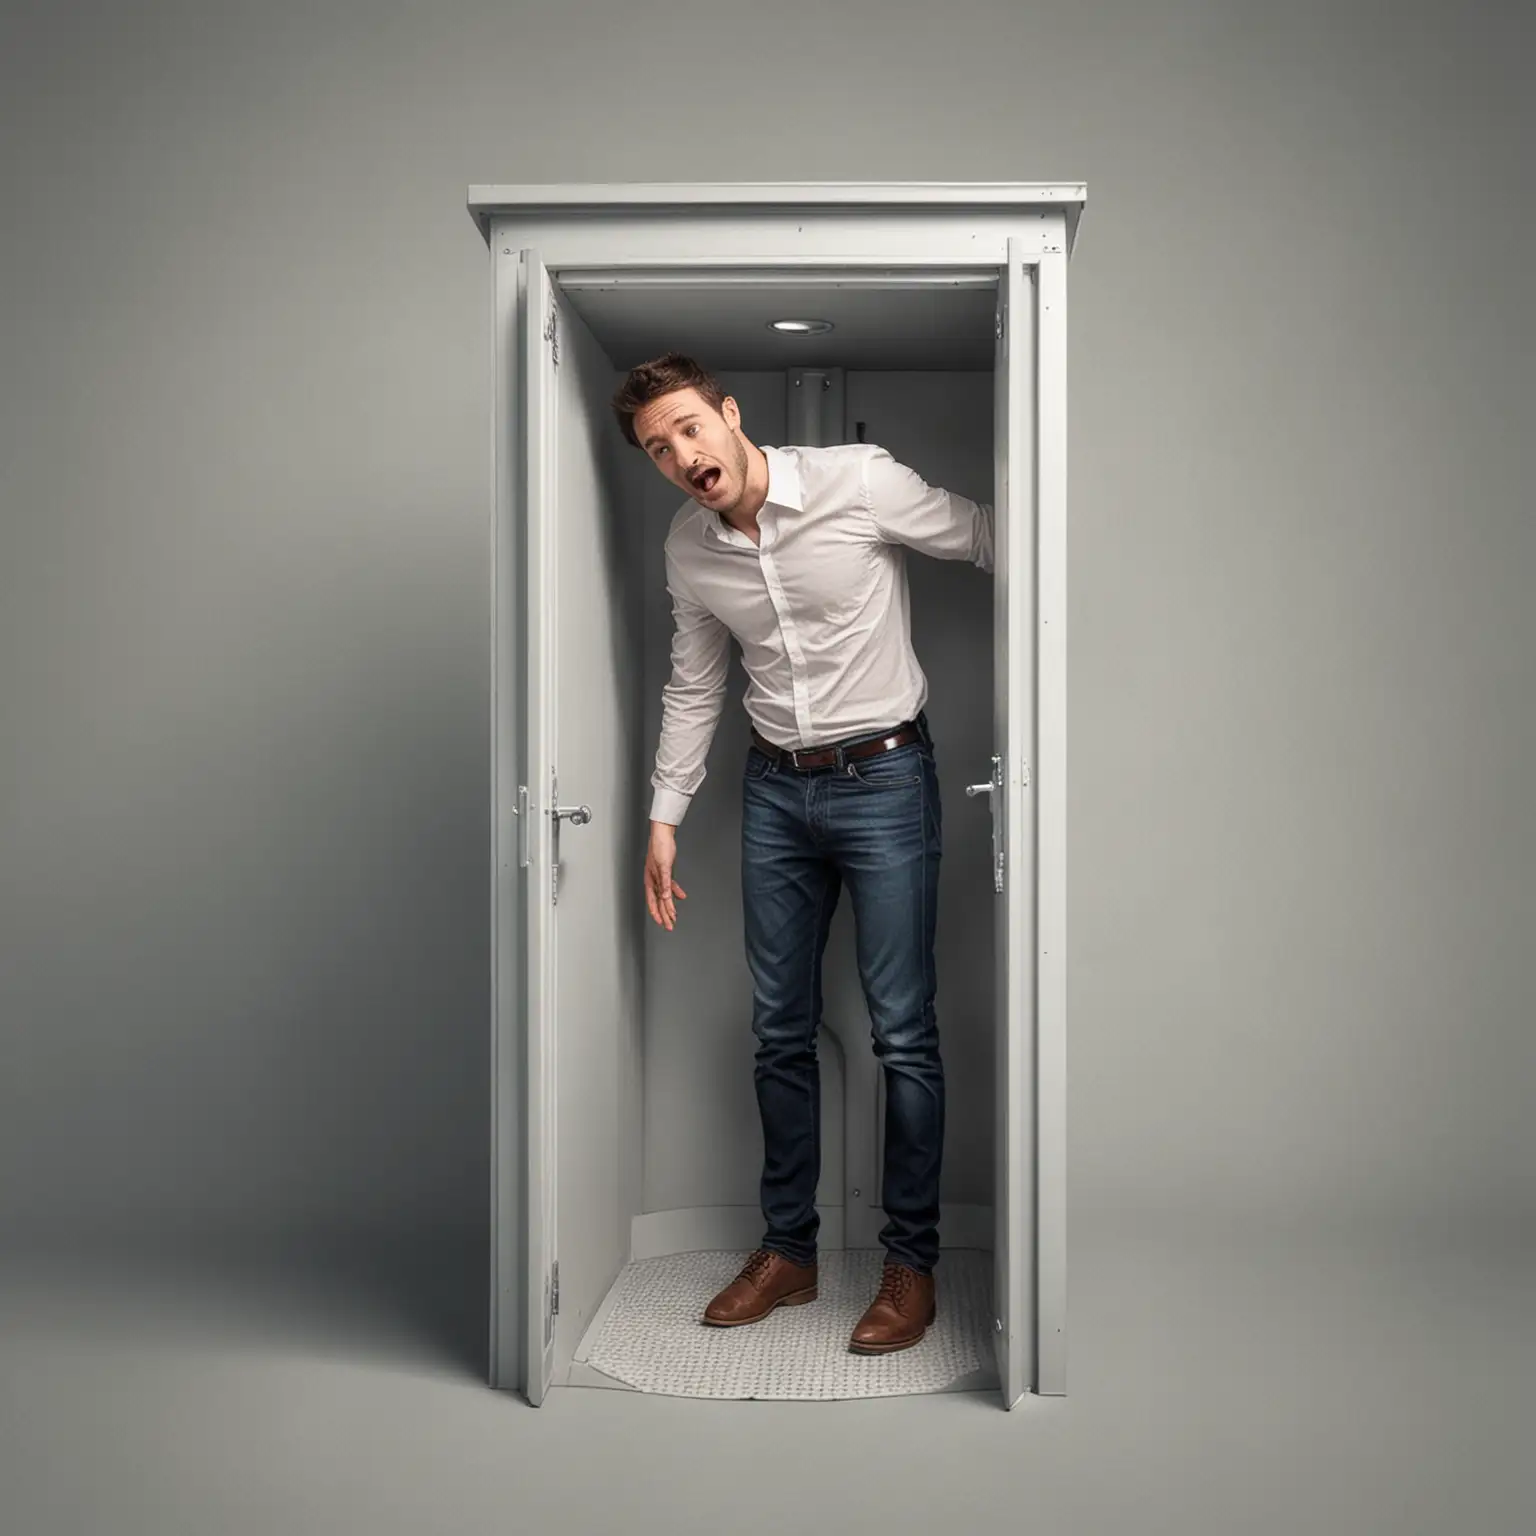 Man Standing in Cramped Toilet Booth